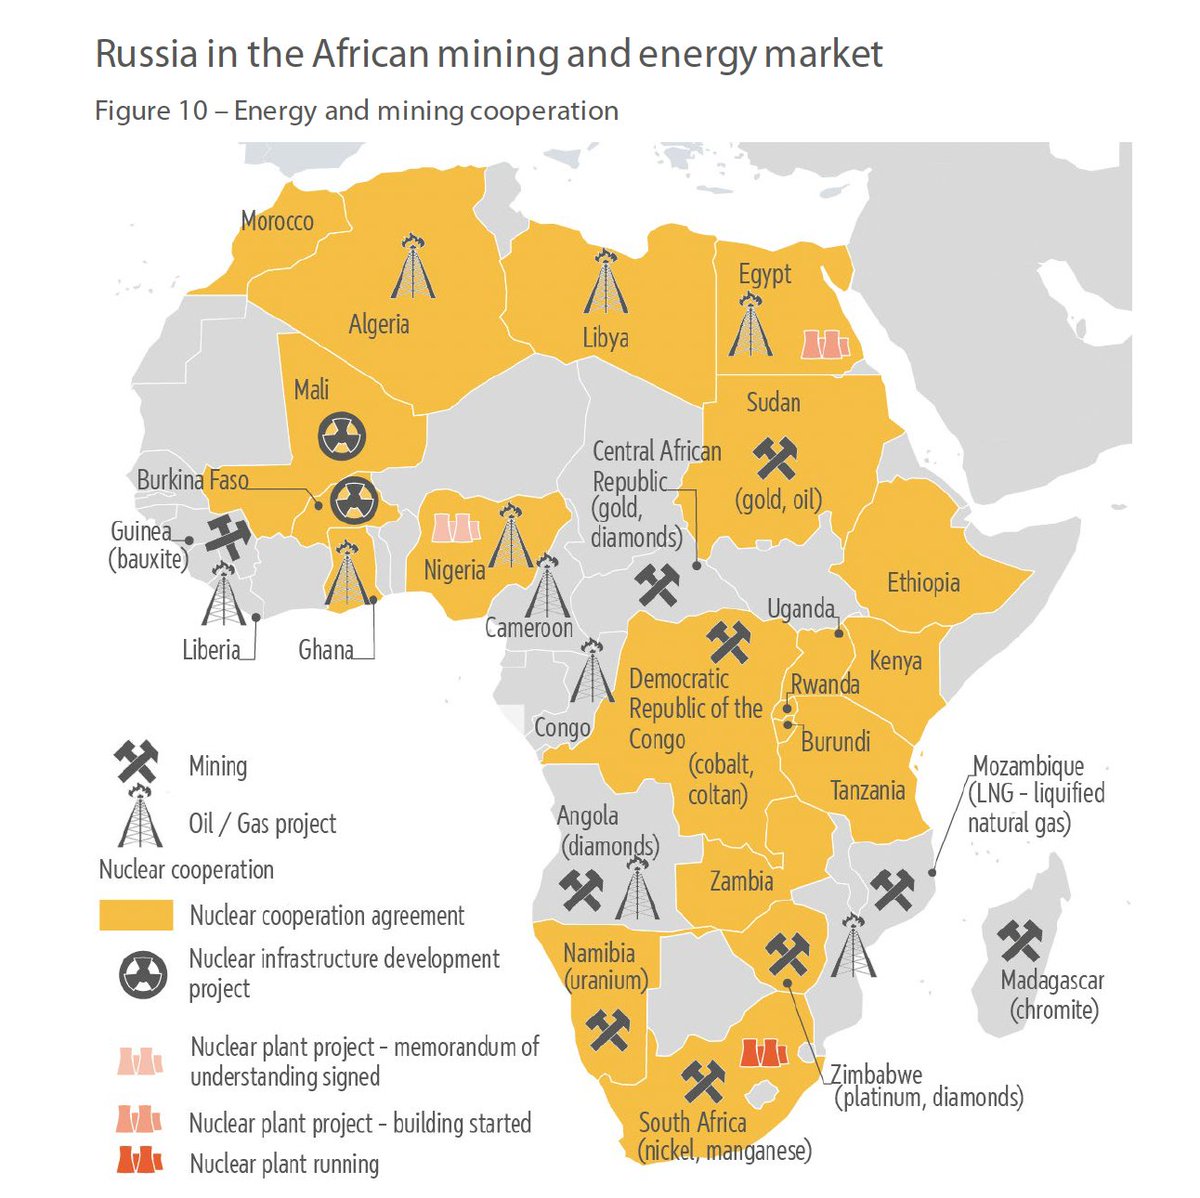 '#Russia has a sizeable presence in the #Africa mining & energy market. Russian mining concessions are concentrated in countries characterised by poor governance...which allows the line between official concessions & unofficial concessions to be blurred' europarl.europa.eu/thinktank/en/d…